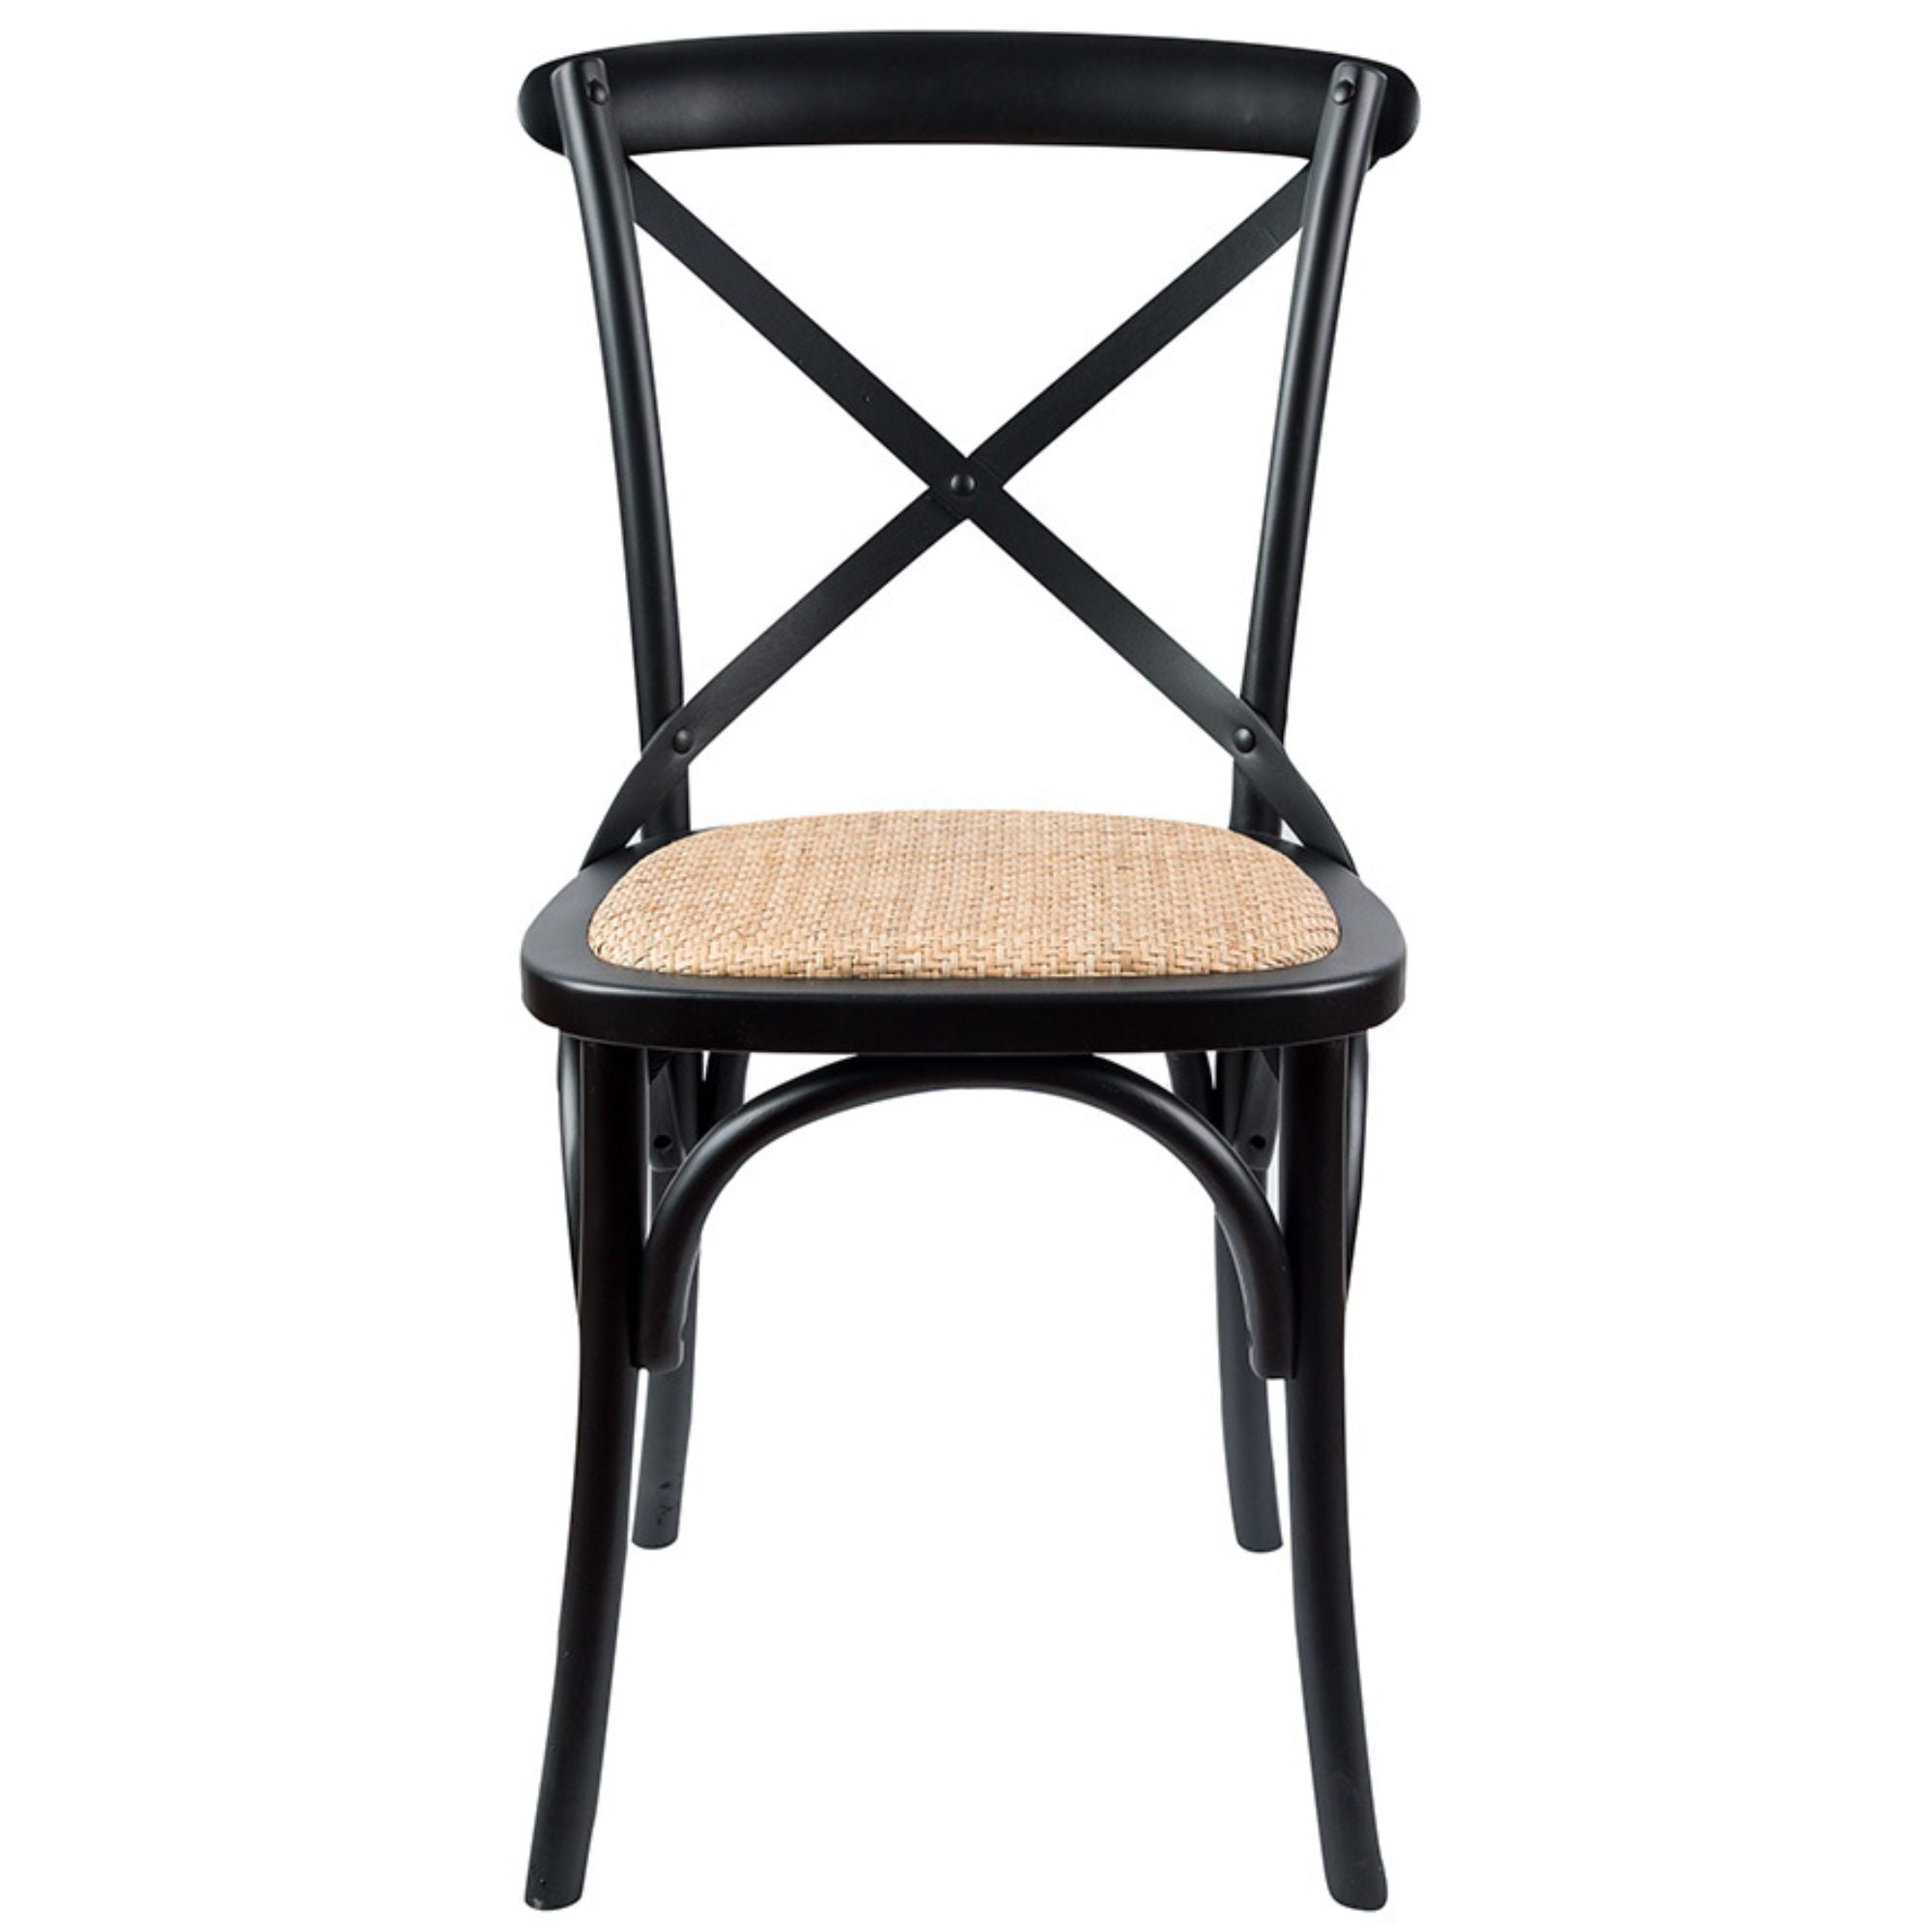 Crossback Dining Chair Set Of 2 Solid Birch Timber Wood Ratan Seat - Black